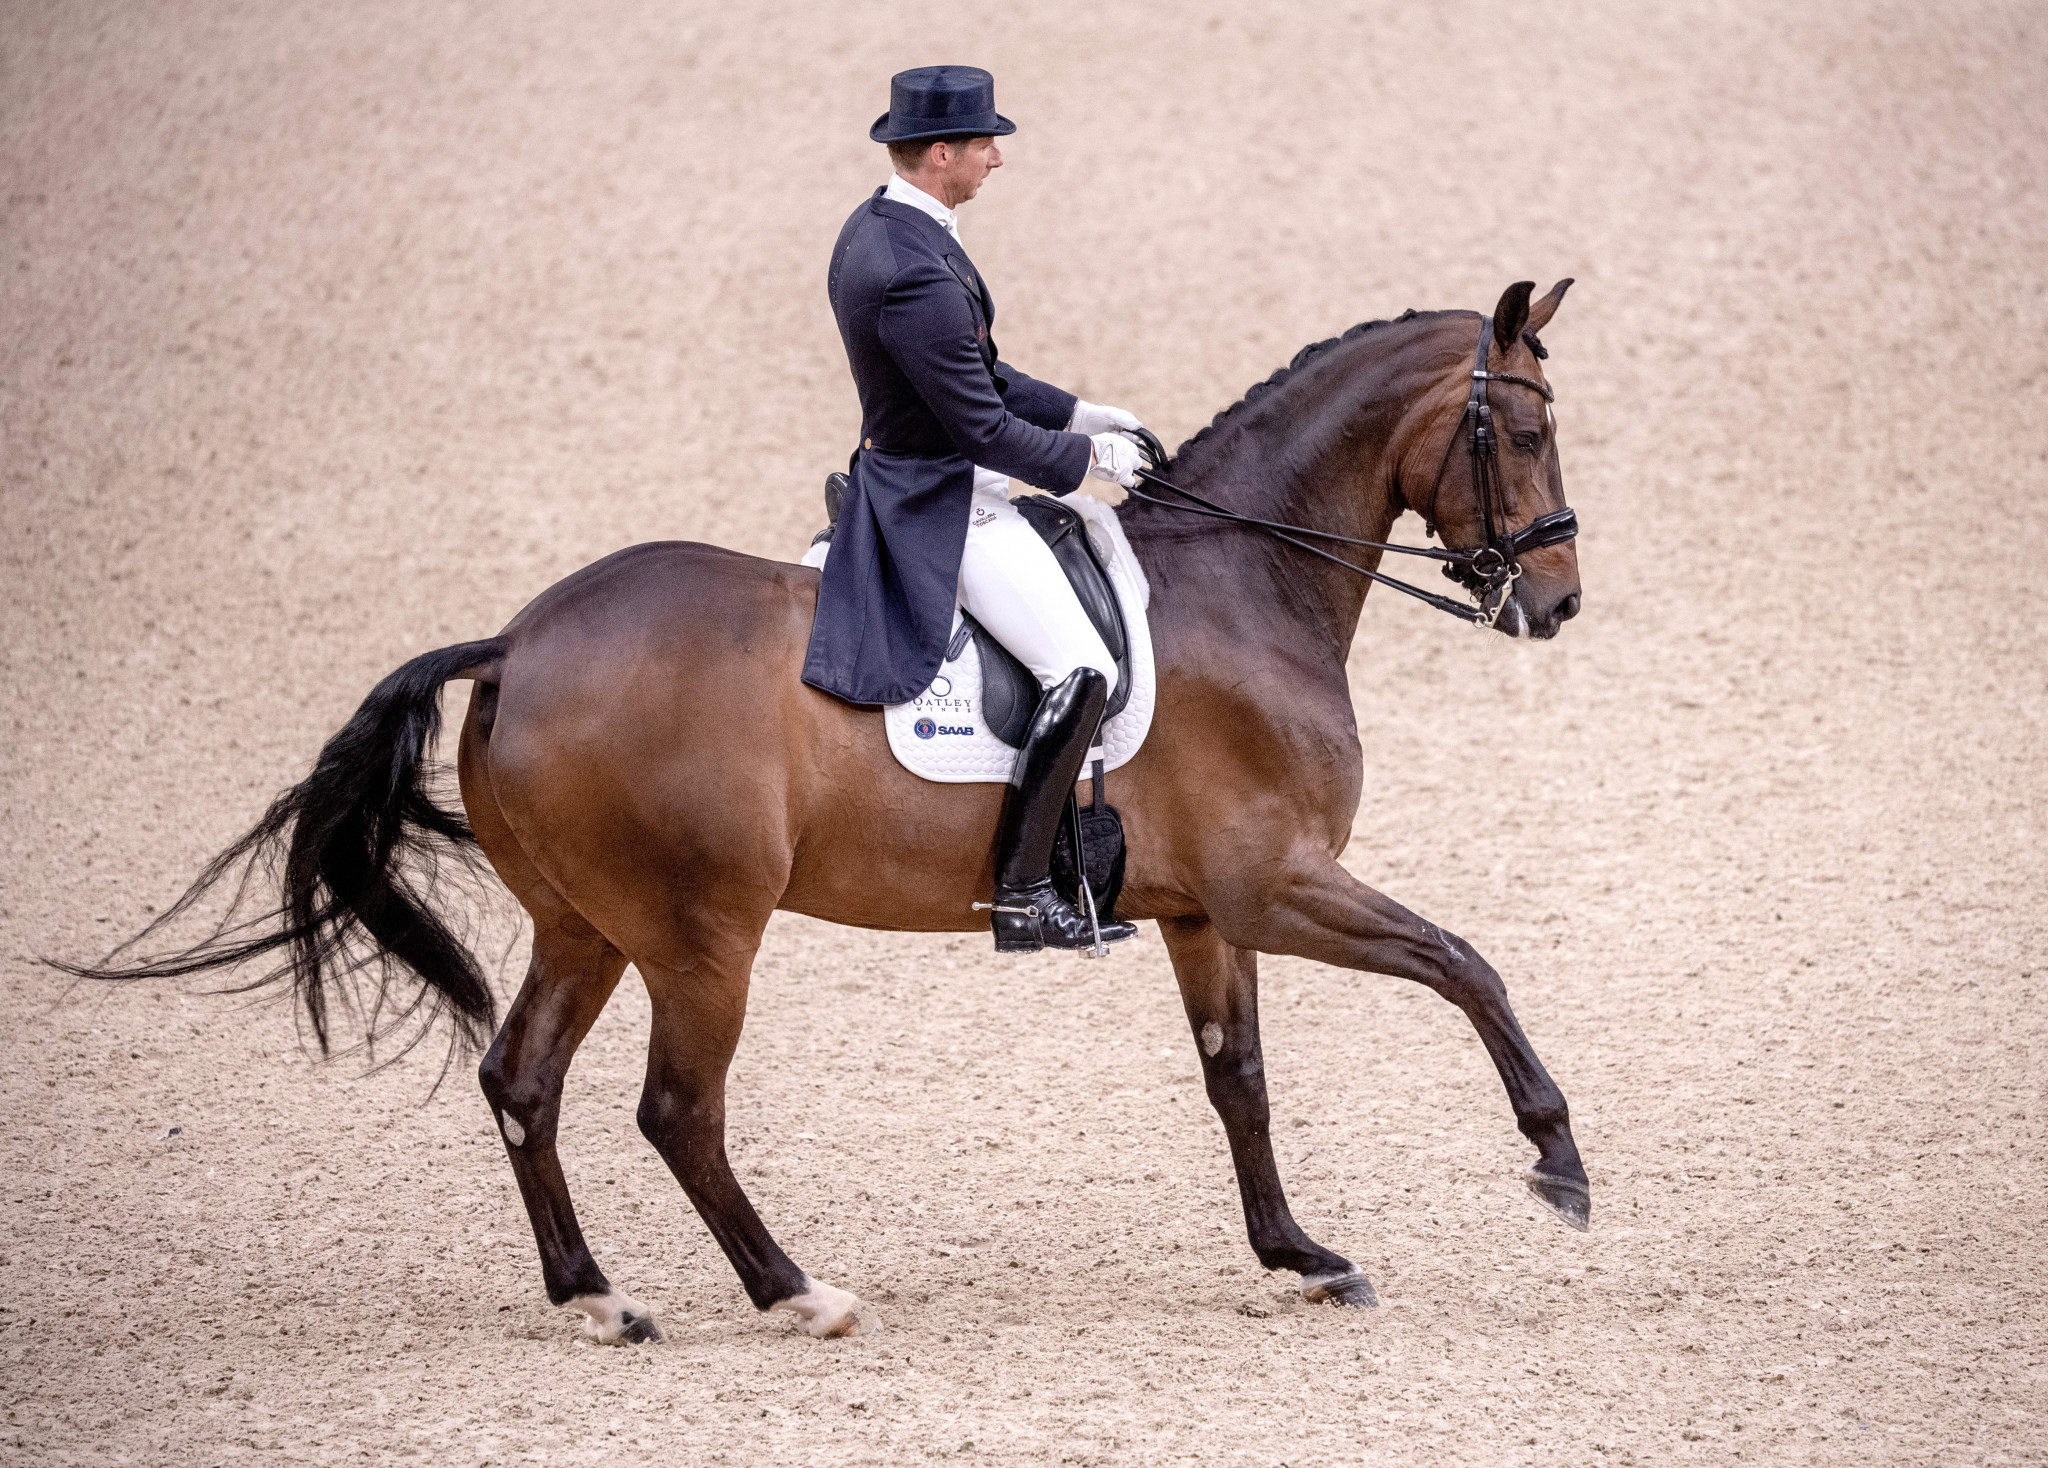 Sweden triumph on home soil at FEI Dressage Nations Cup